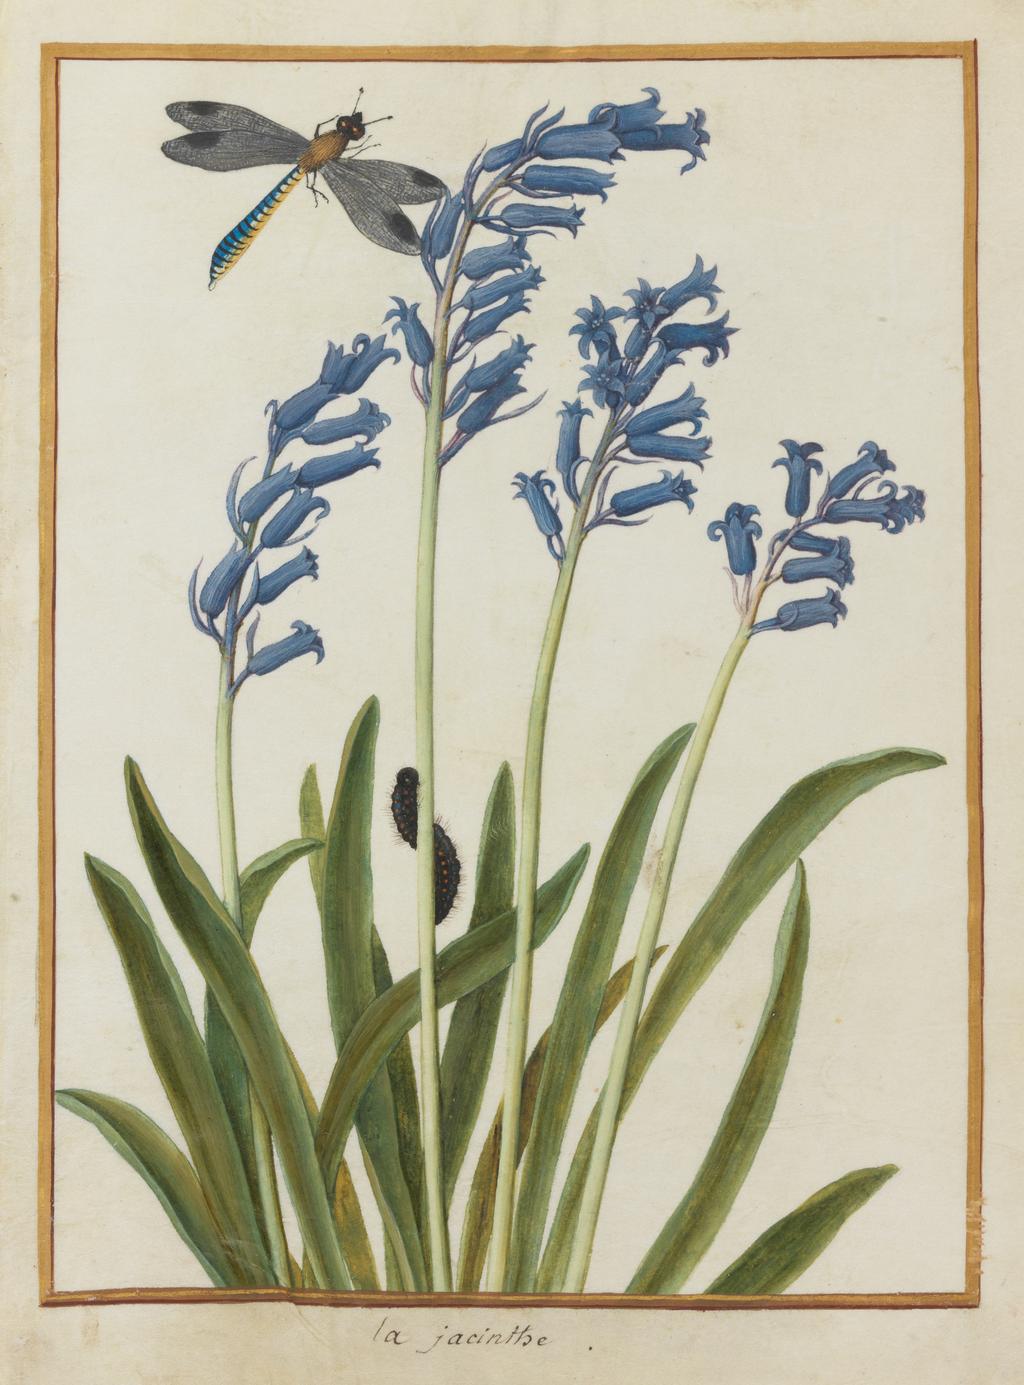 An image of Album. Flower drawings. Bluebell (Endymon non-scriptus) and a dragonfly. Unknown French draughtsman. Watercolour and some bodycolour on vellum tipped in on album sheet, height 244 mm, width 181 mm, circa 1750. Notes: Containing 44 drawings on vellum, tipped in on the pages of an album bound in red leather tooled in gilt. The pages are grey rough paper with white interleaves and multi-coloured end-papers. Each drawing is contained by ruled margins coloured in gold and red.